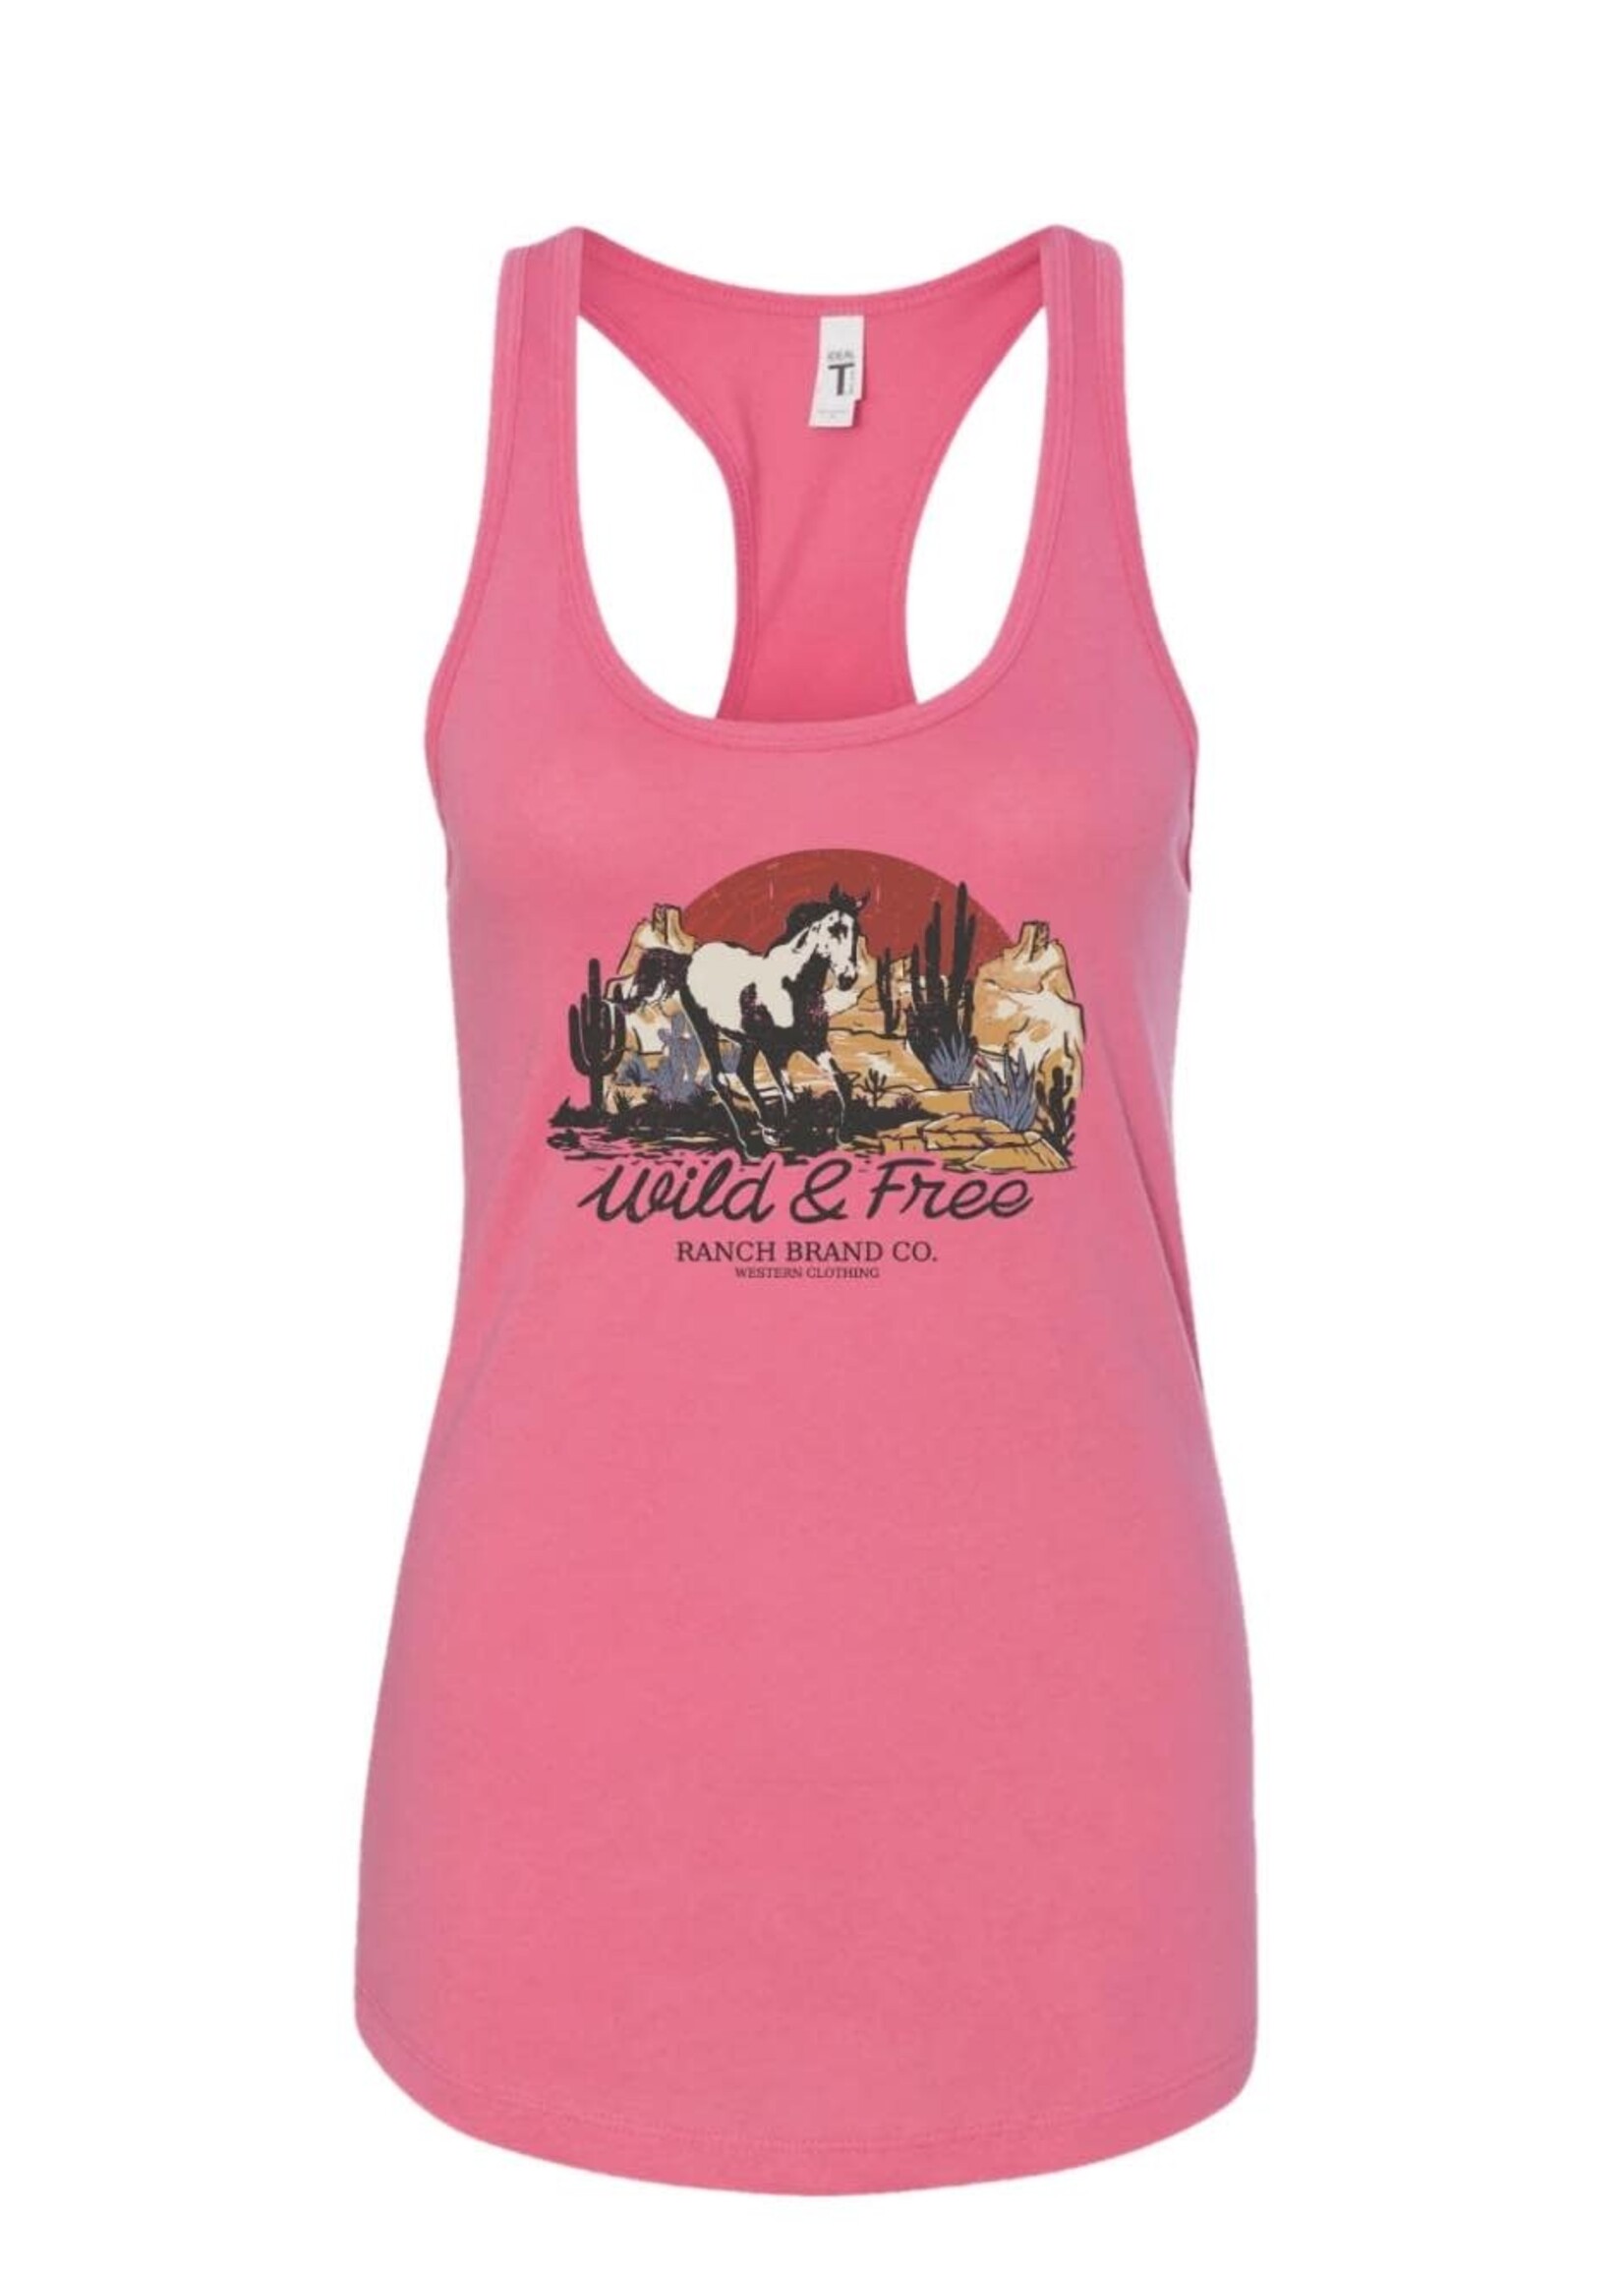 RANCH BRAND RANCH BRAND - CAMISOLE - FREE HORSE